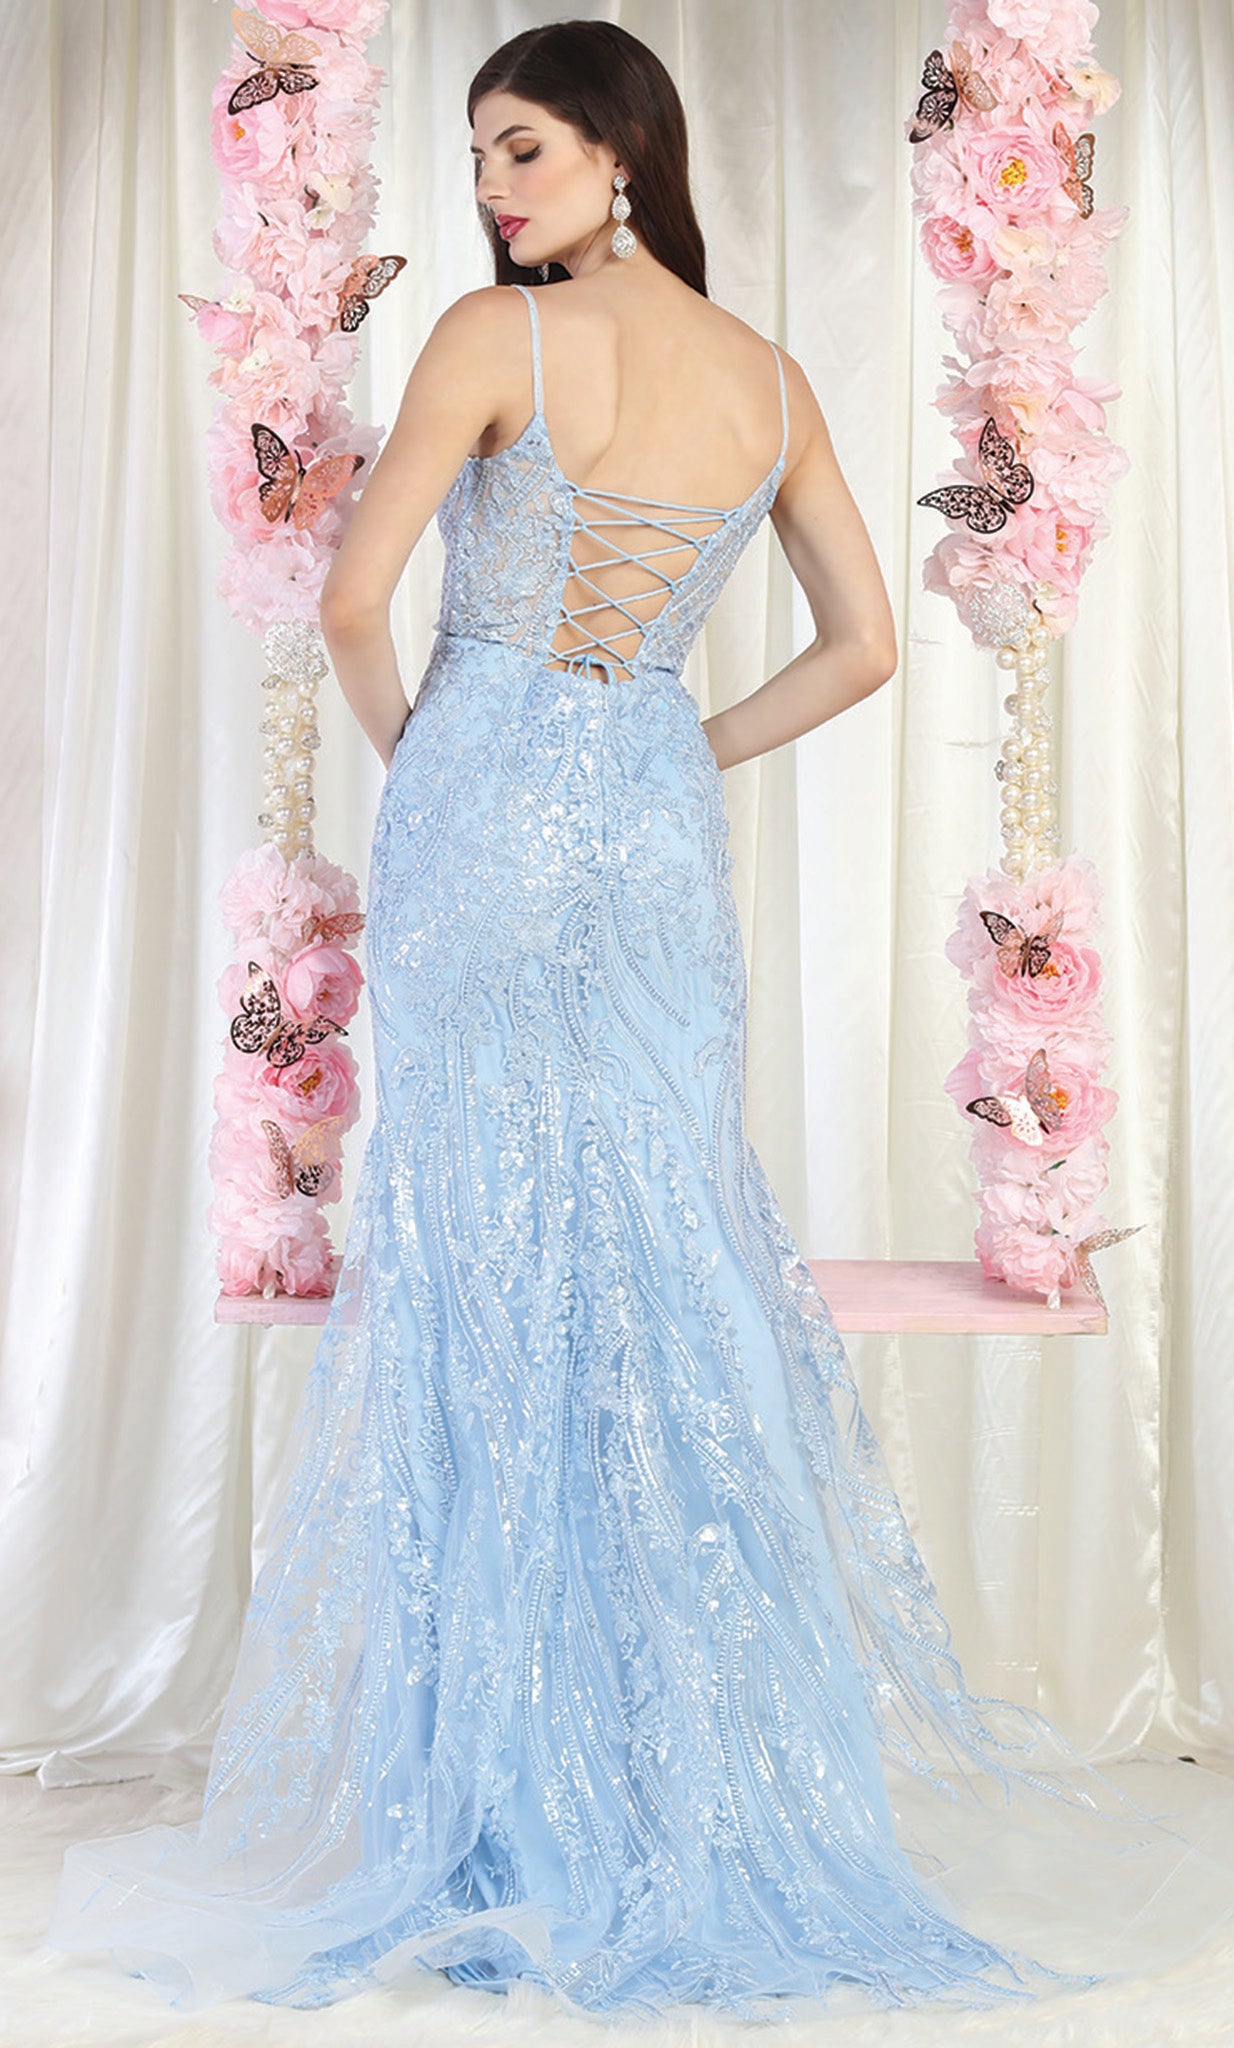 May Queen RQ7974 Blue